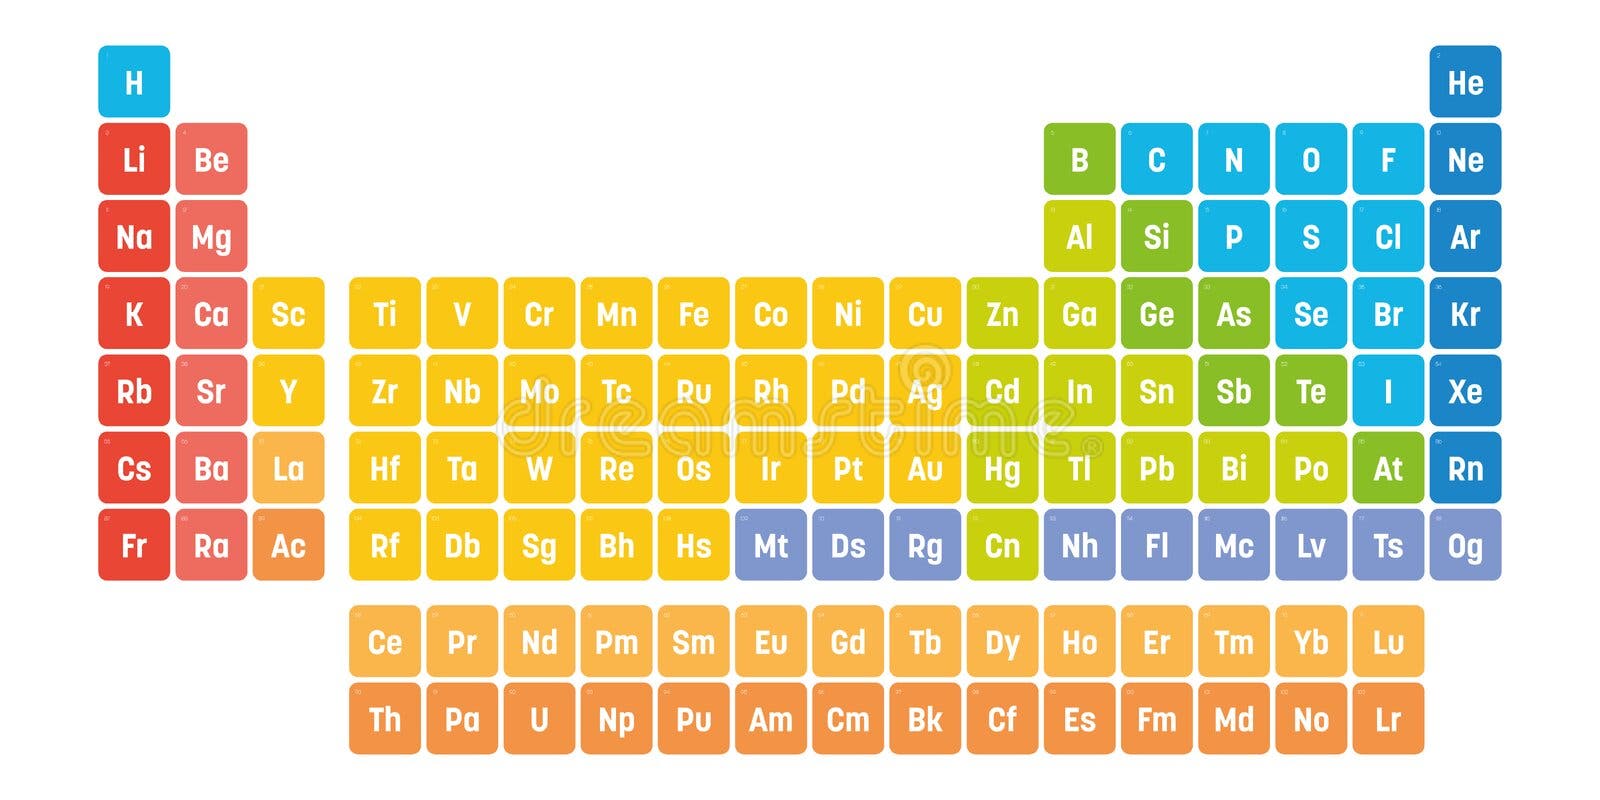 Colorful Periodic Table of Elements. Simple Table Including Element ...